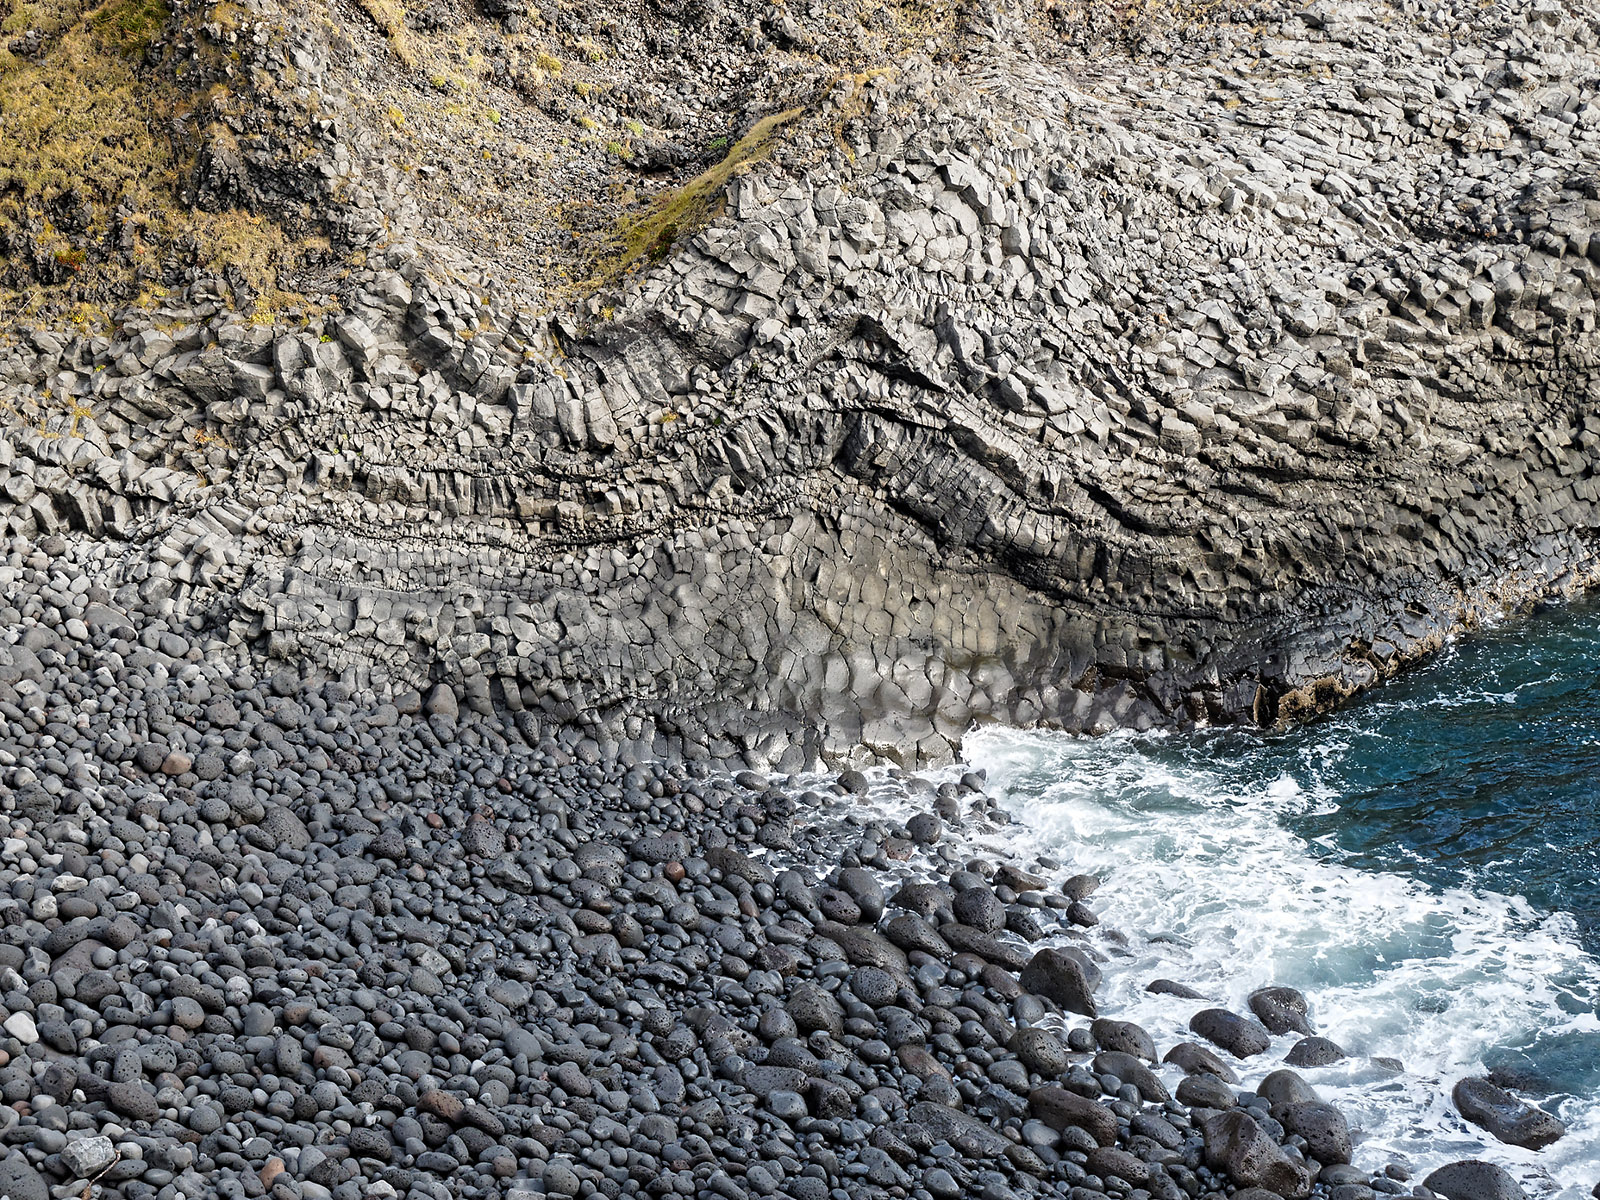 The interwoven pattern of eroded columnar basalt at the coast near Hellmar tells a story of successive periods of lava flow with cooling periods.